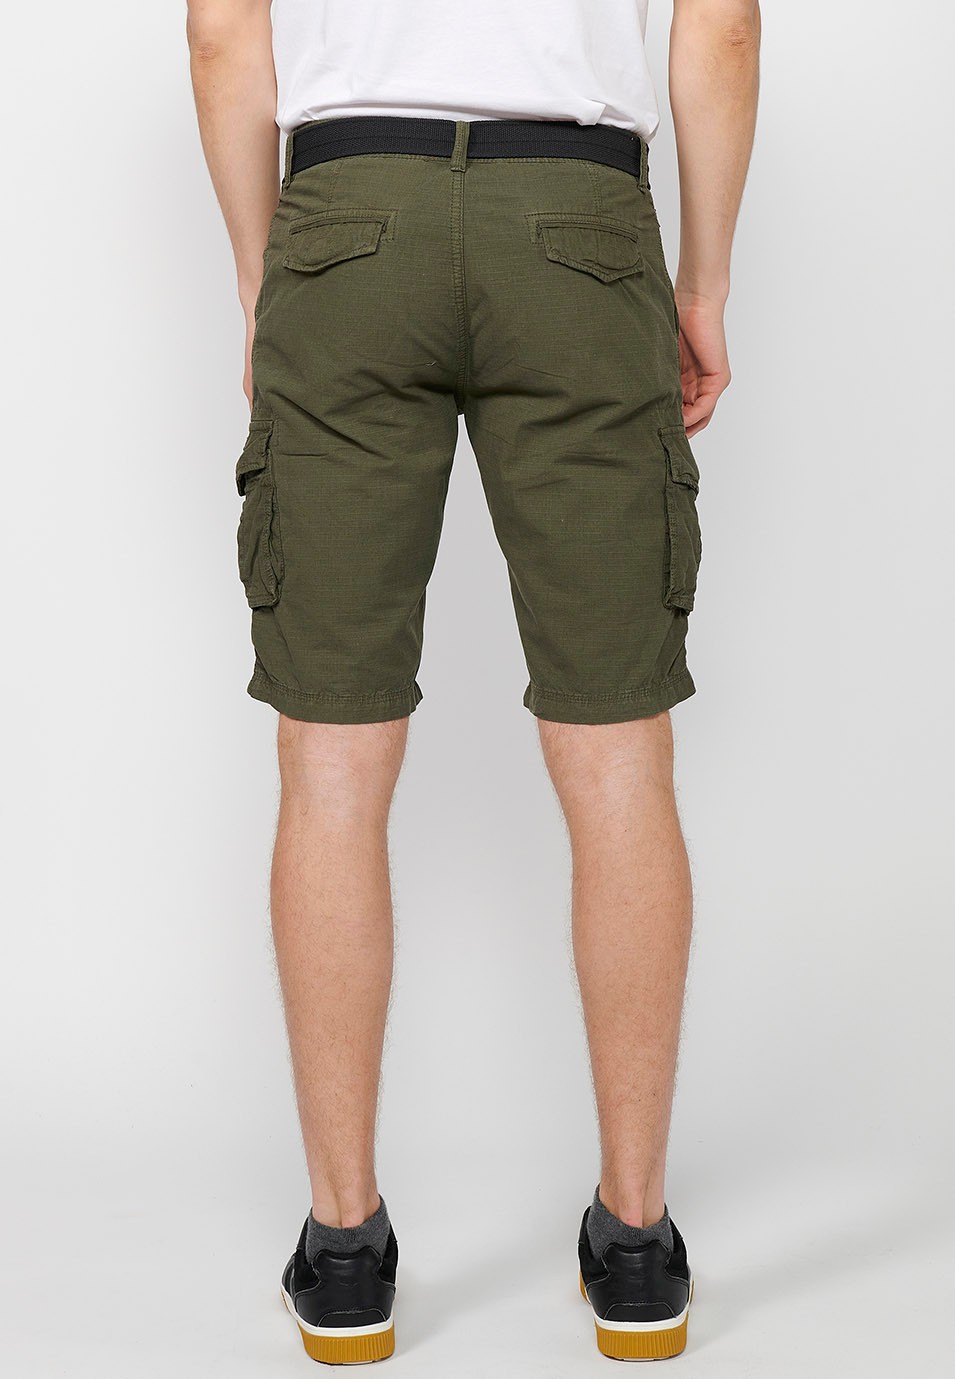 Cotton cargo shorts with belt and front closure with zipper and button with pockets, two back pockets with flap and two green cargo pants for Men 2